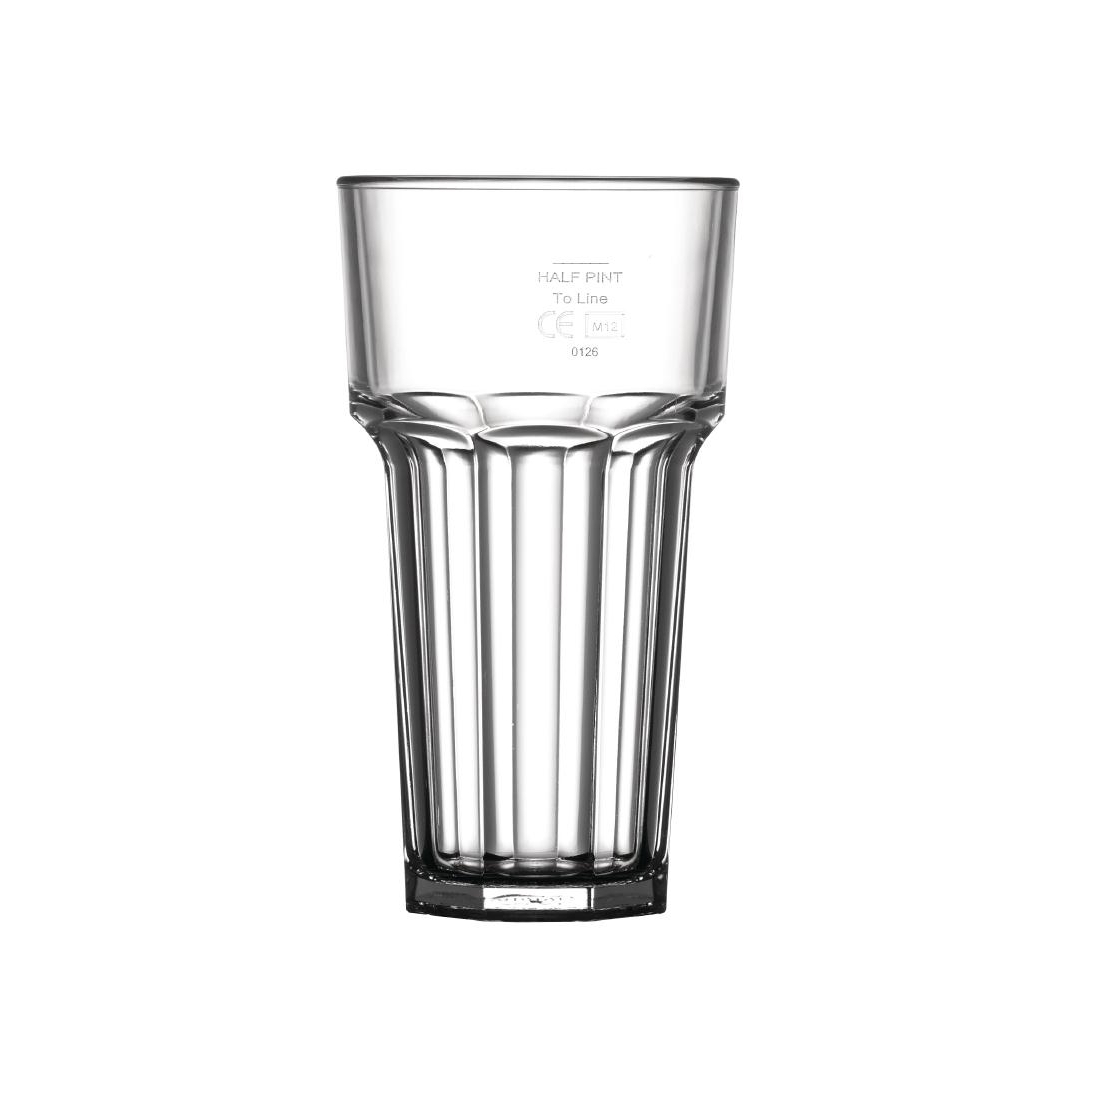 BBP Polycarbonate American Highball Glasses Lined Half Pint CE Marked at 285ml